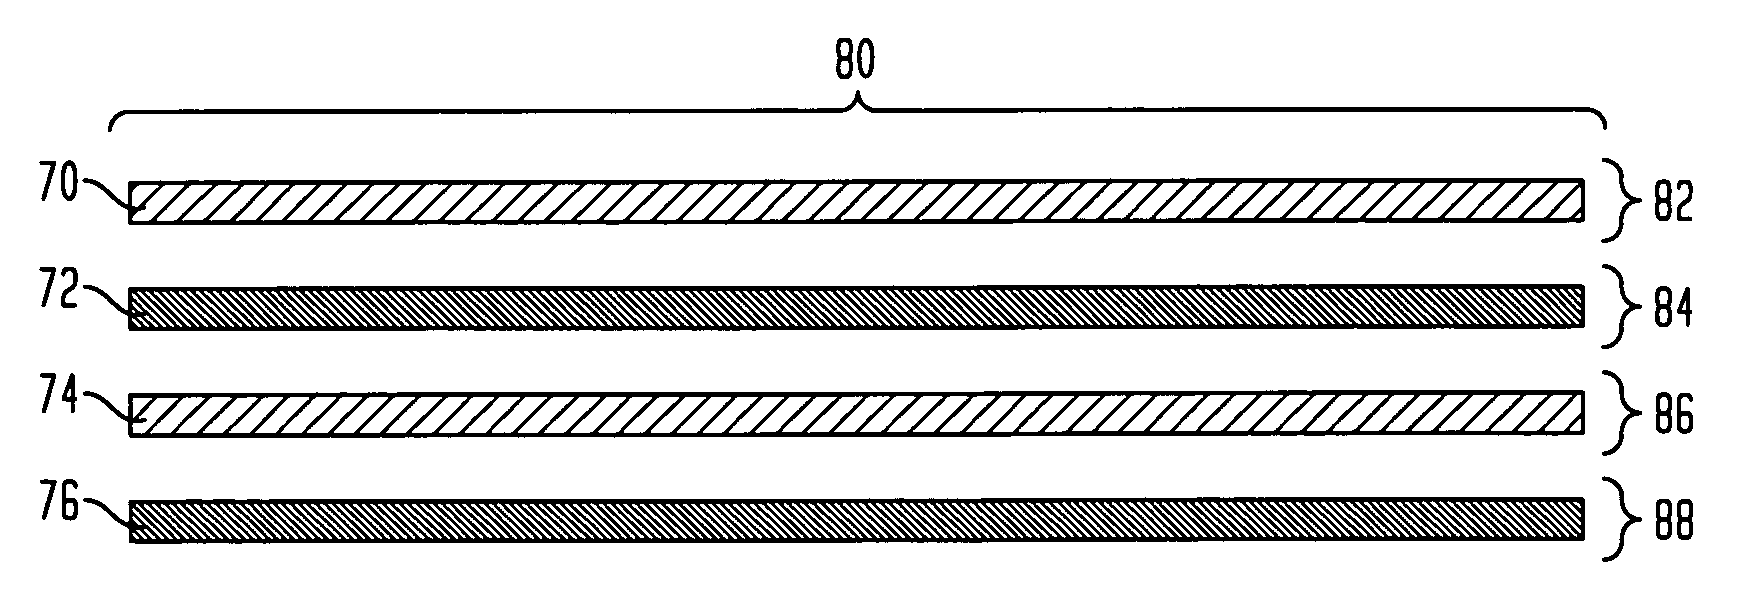 Method of making regenerated cellulose microfibers and absorbent products incorporating same